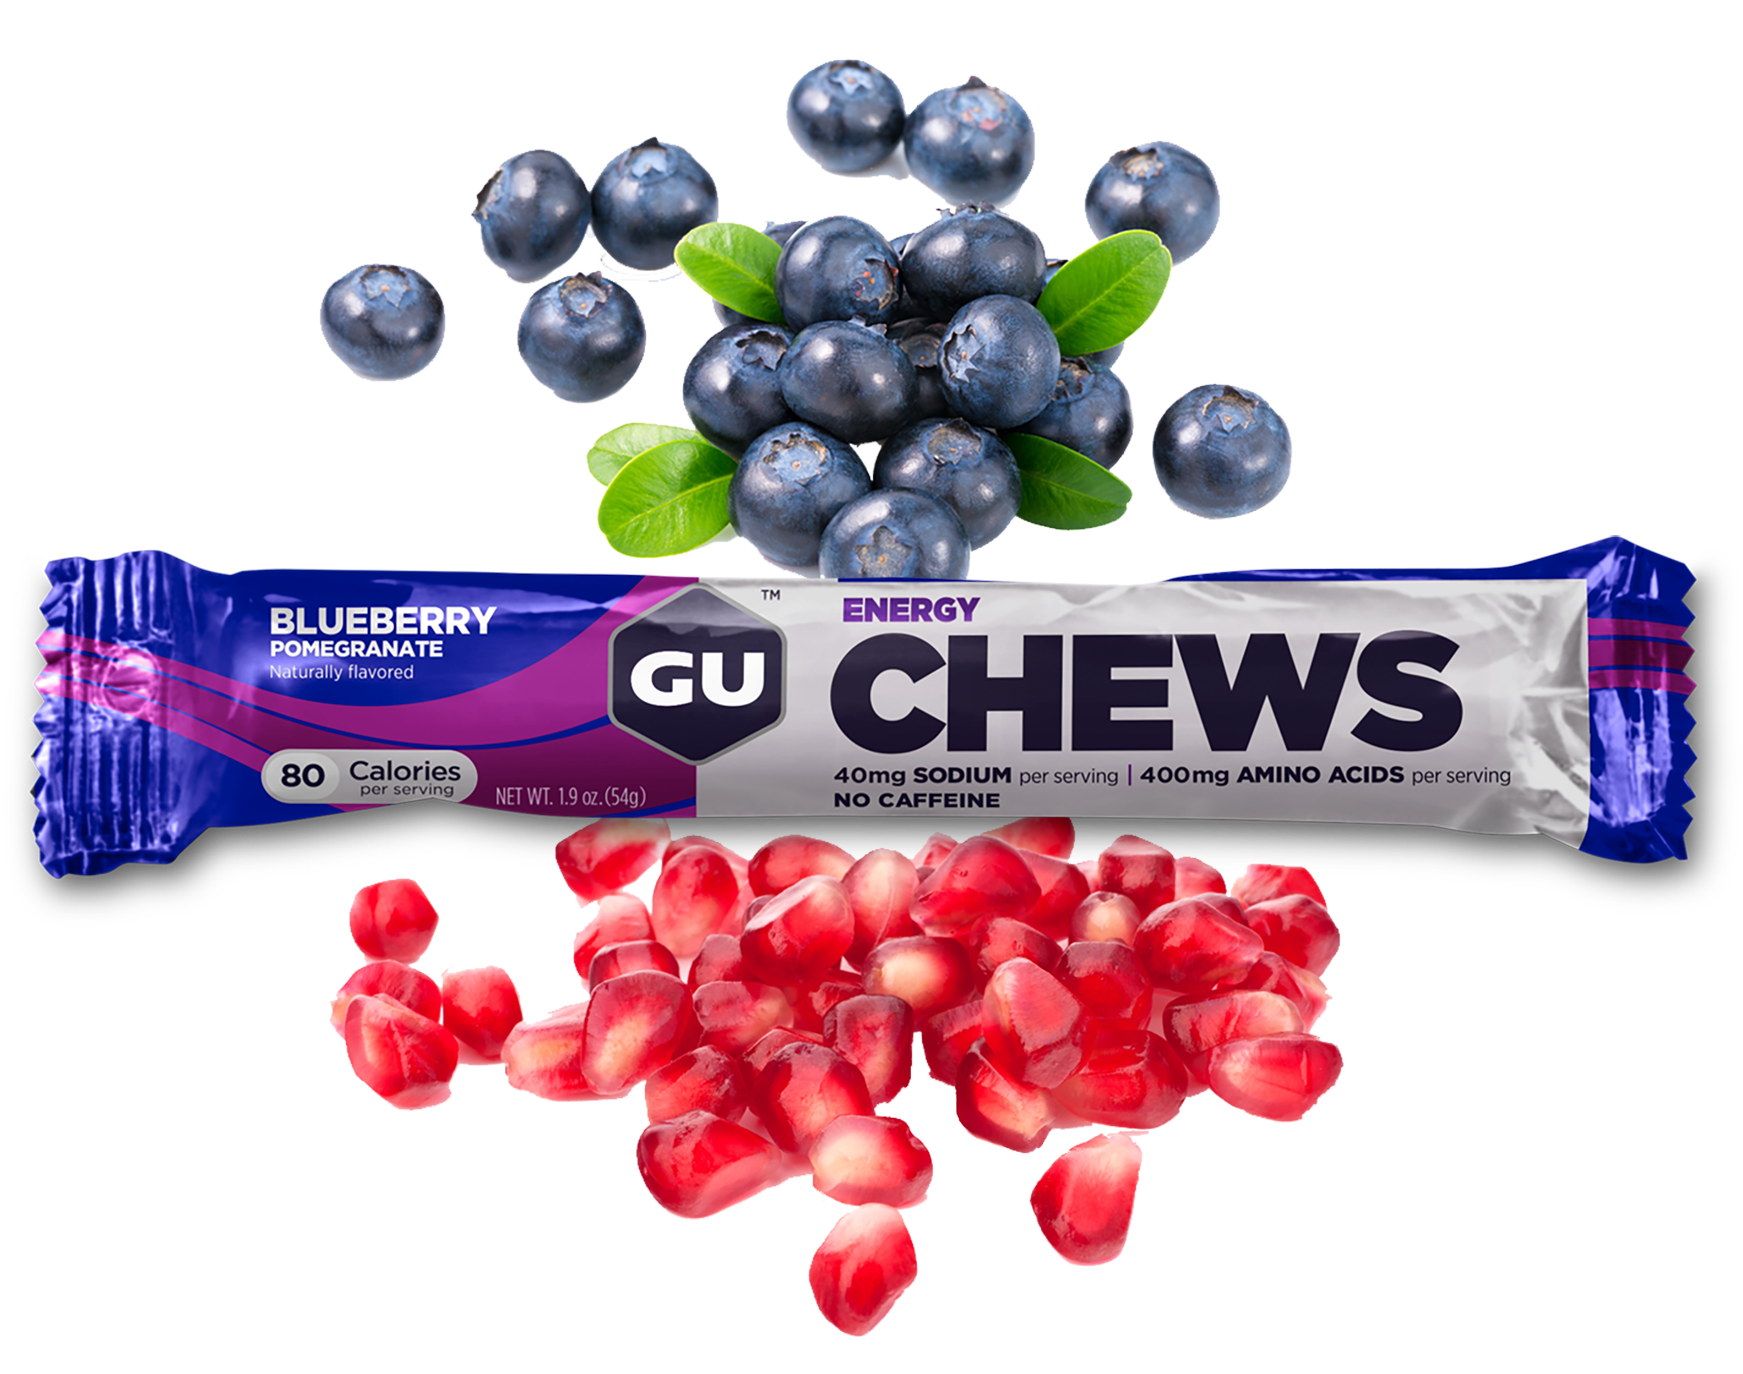 A Package Of Energy Chews And Berries